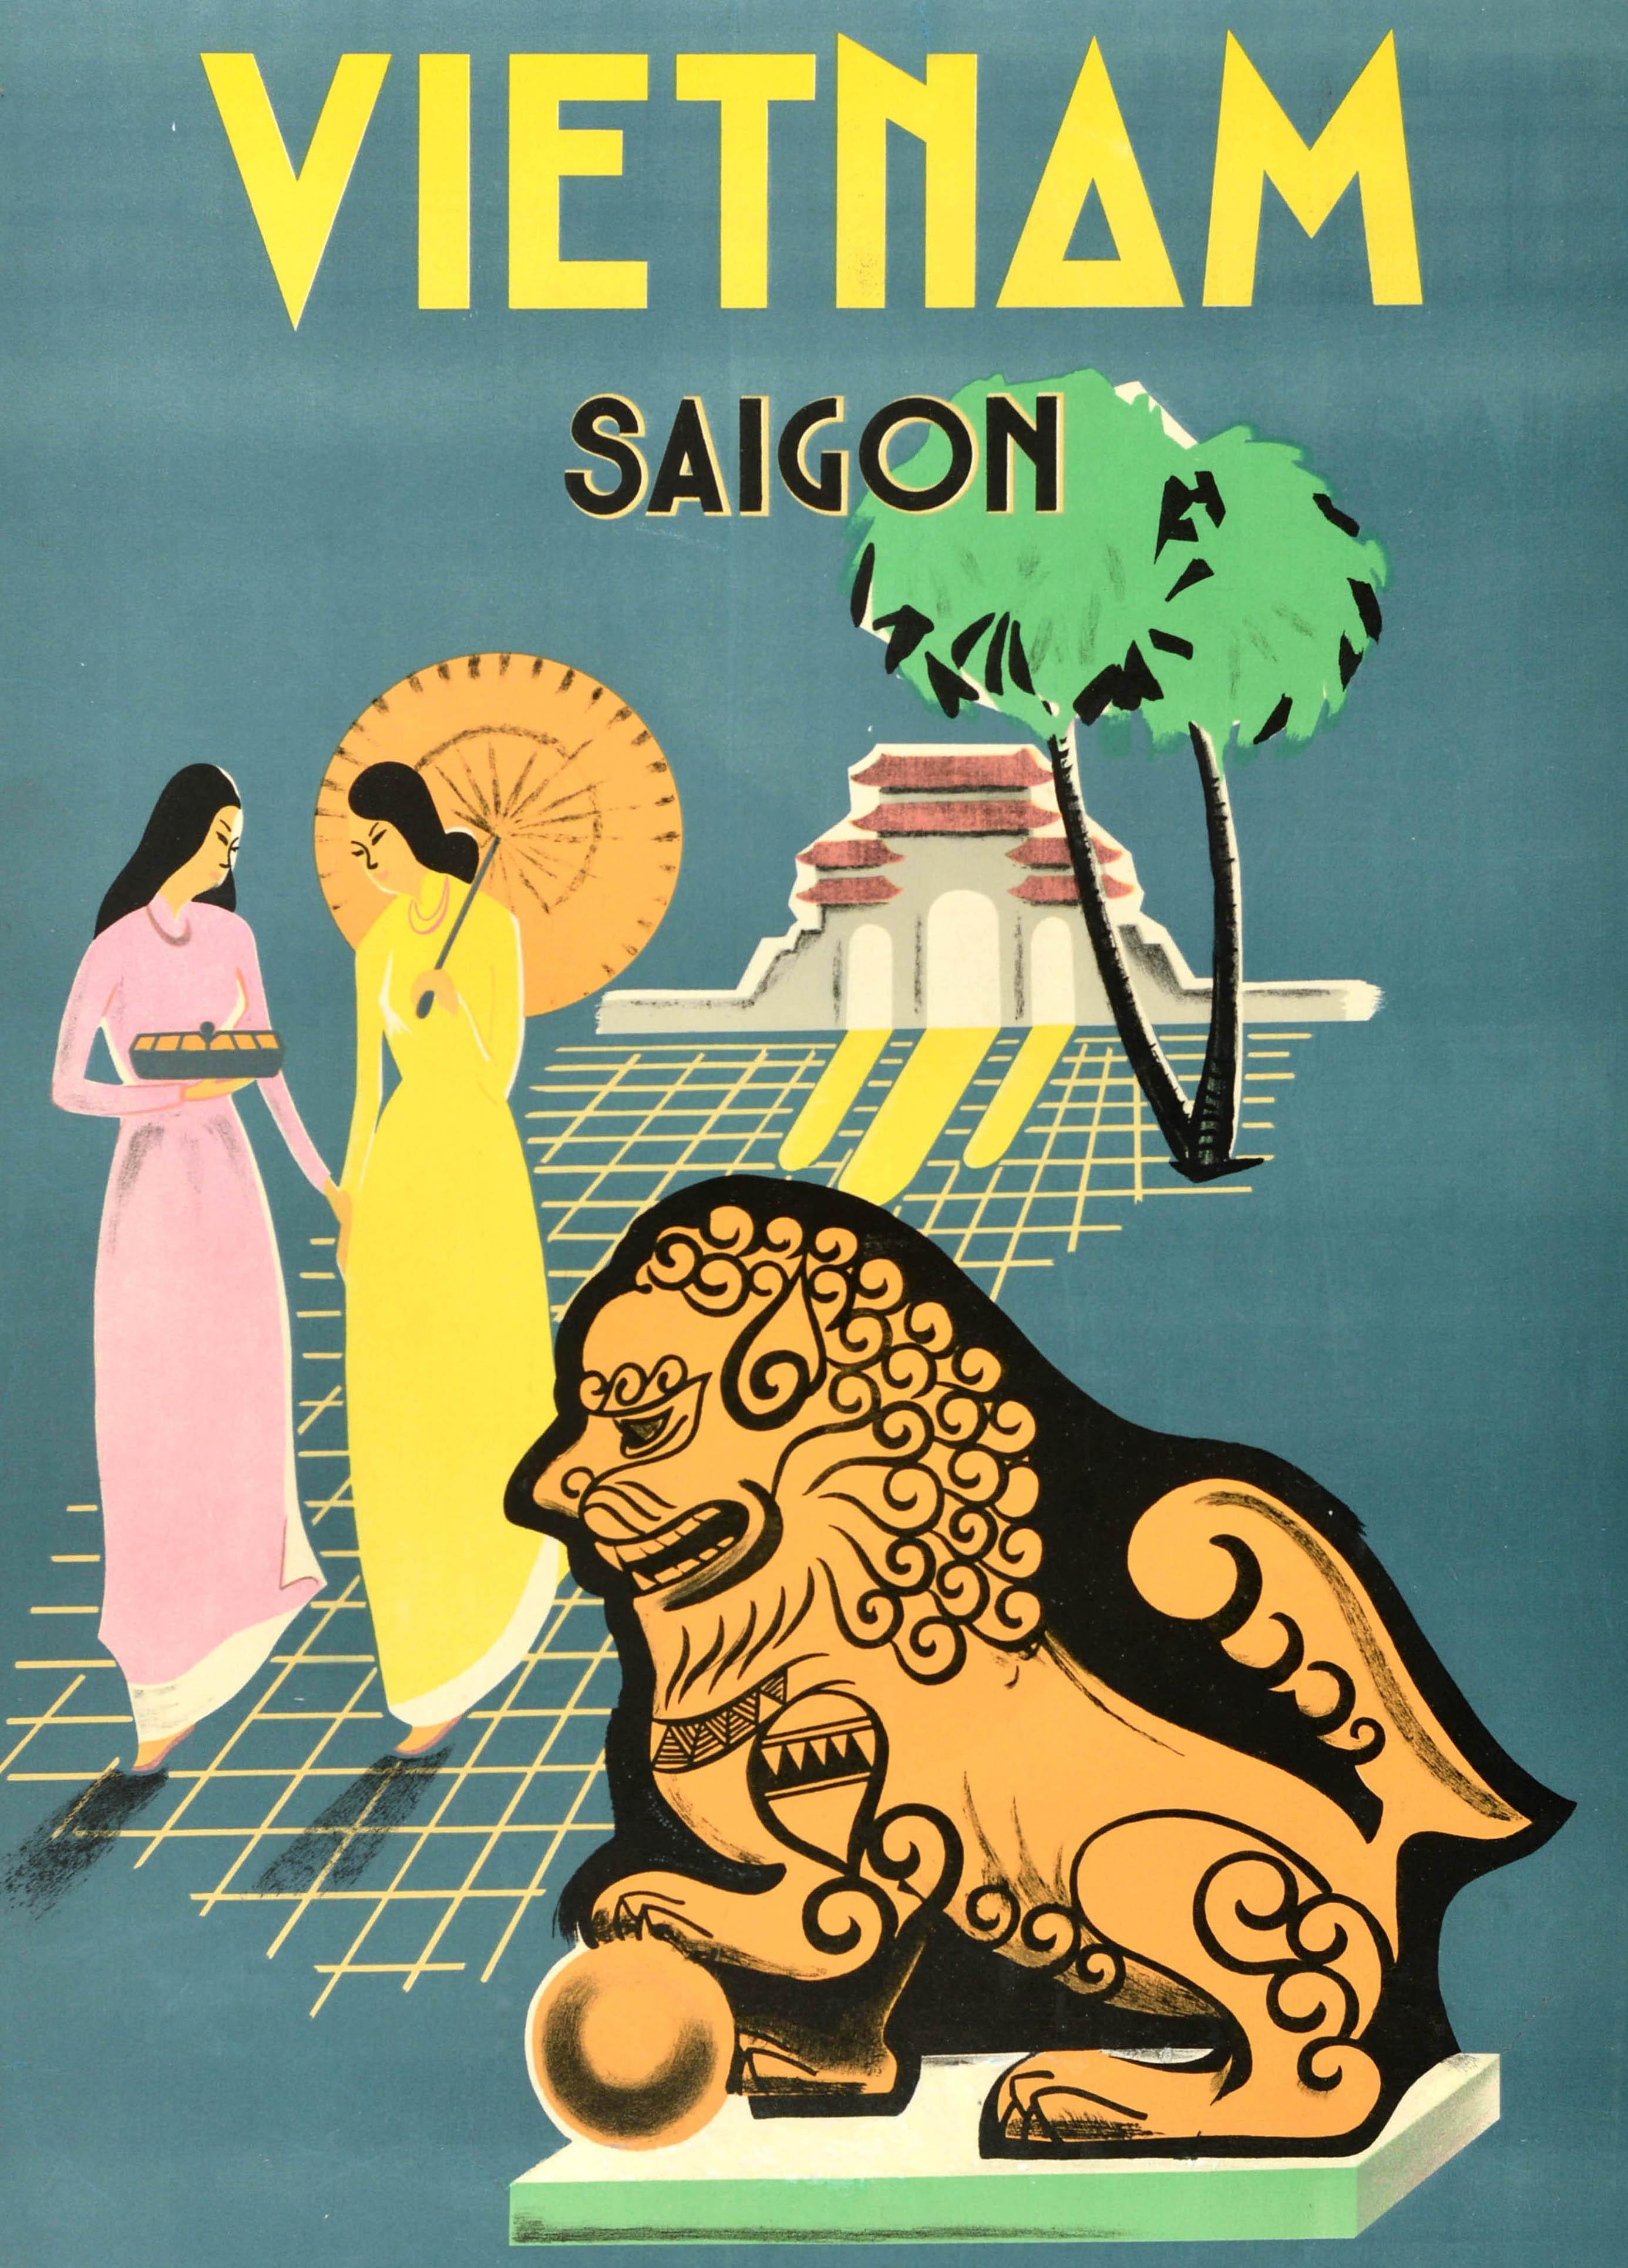 Original vintage Asia travel poster for Vietnam Saigon featuring an image of two ladies in traditional pink and yellow tunic dresses, one holding a tray and the other holding a parasol sun umbrella, walking on a yellow grid design with a lion statue